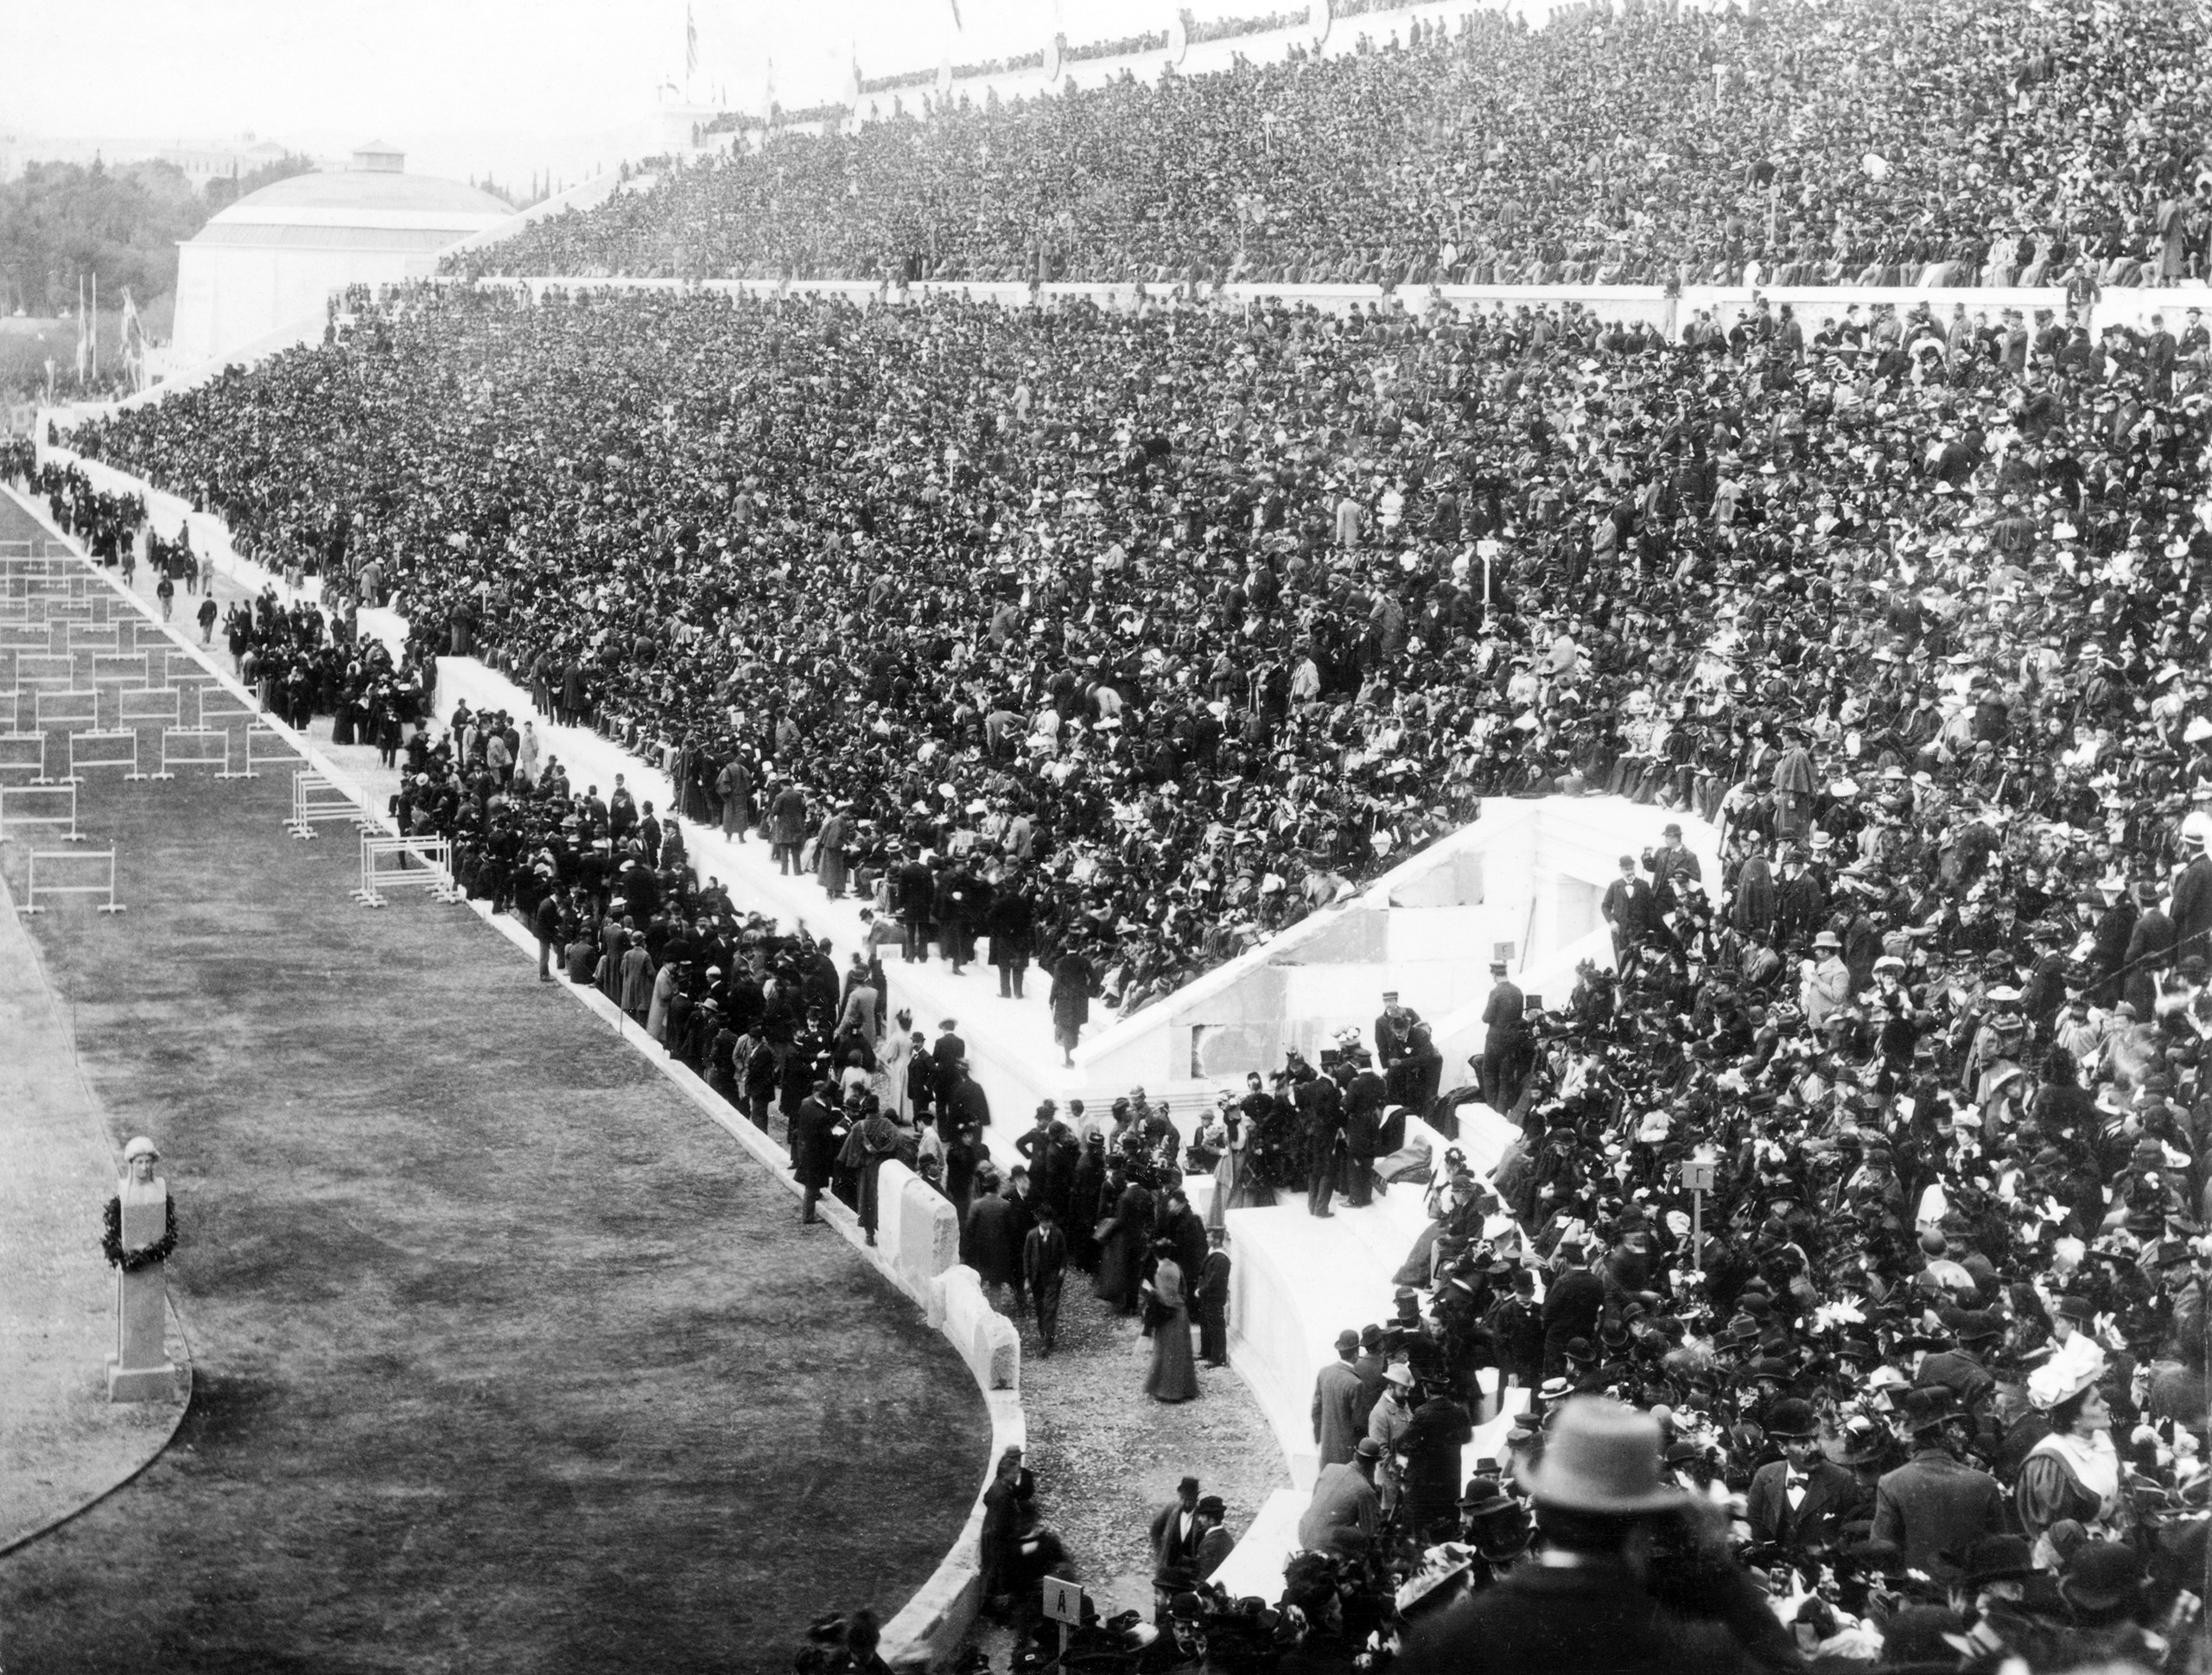 Pan-Athenian stadium before a hurdles event at the 1896 Olympic Games in Athens.